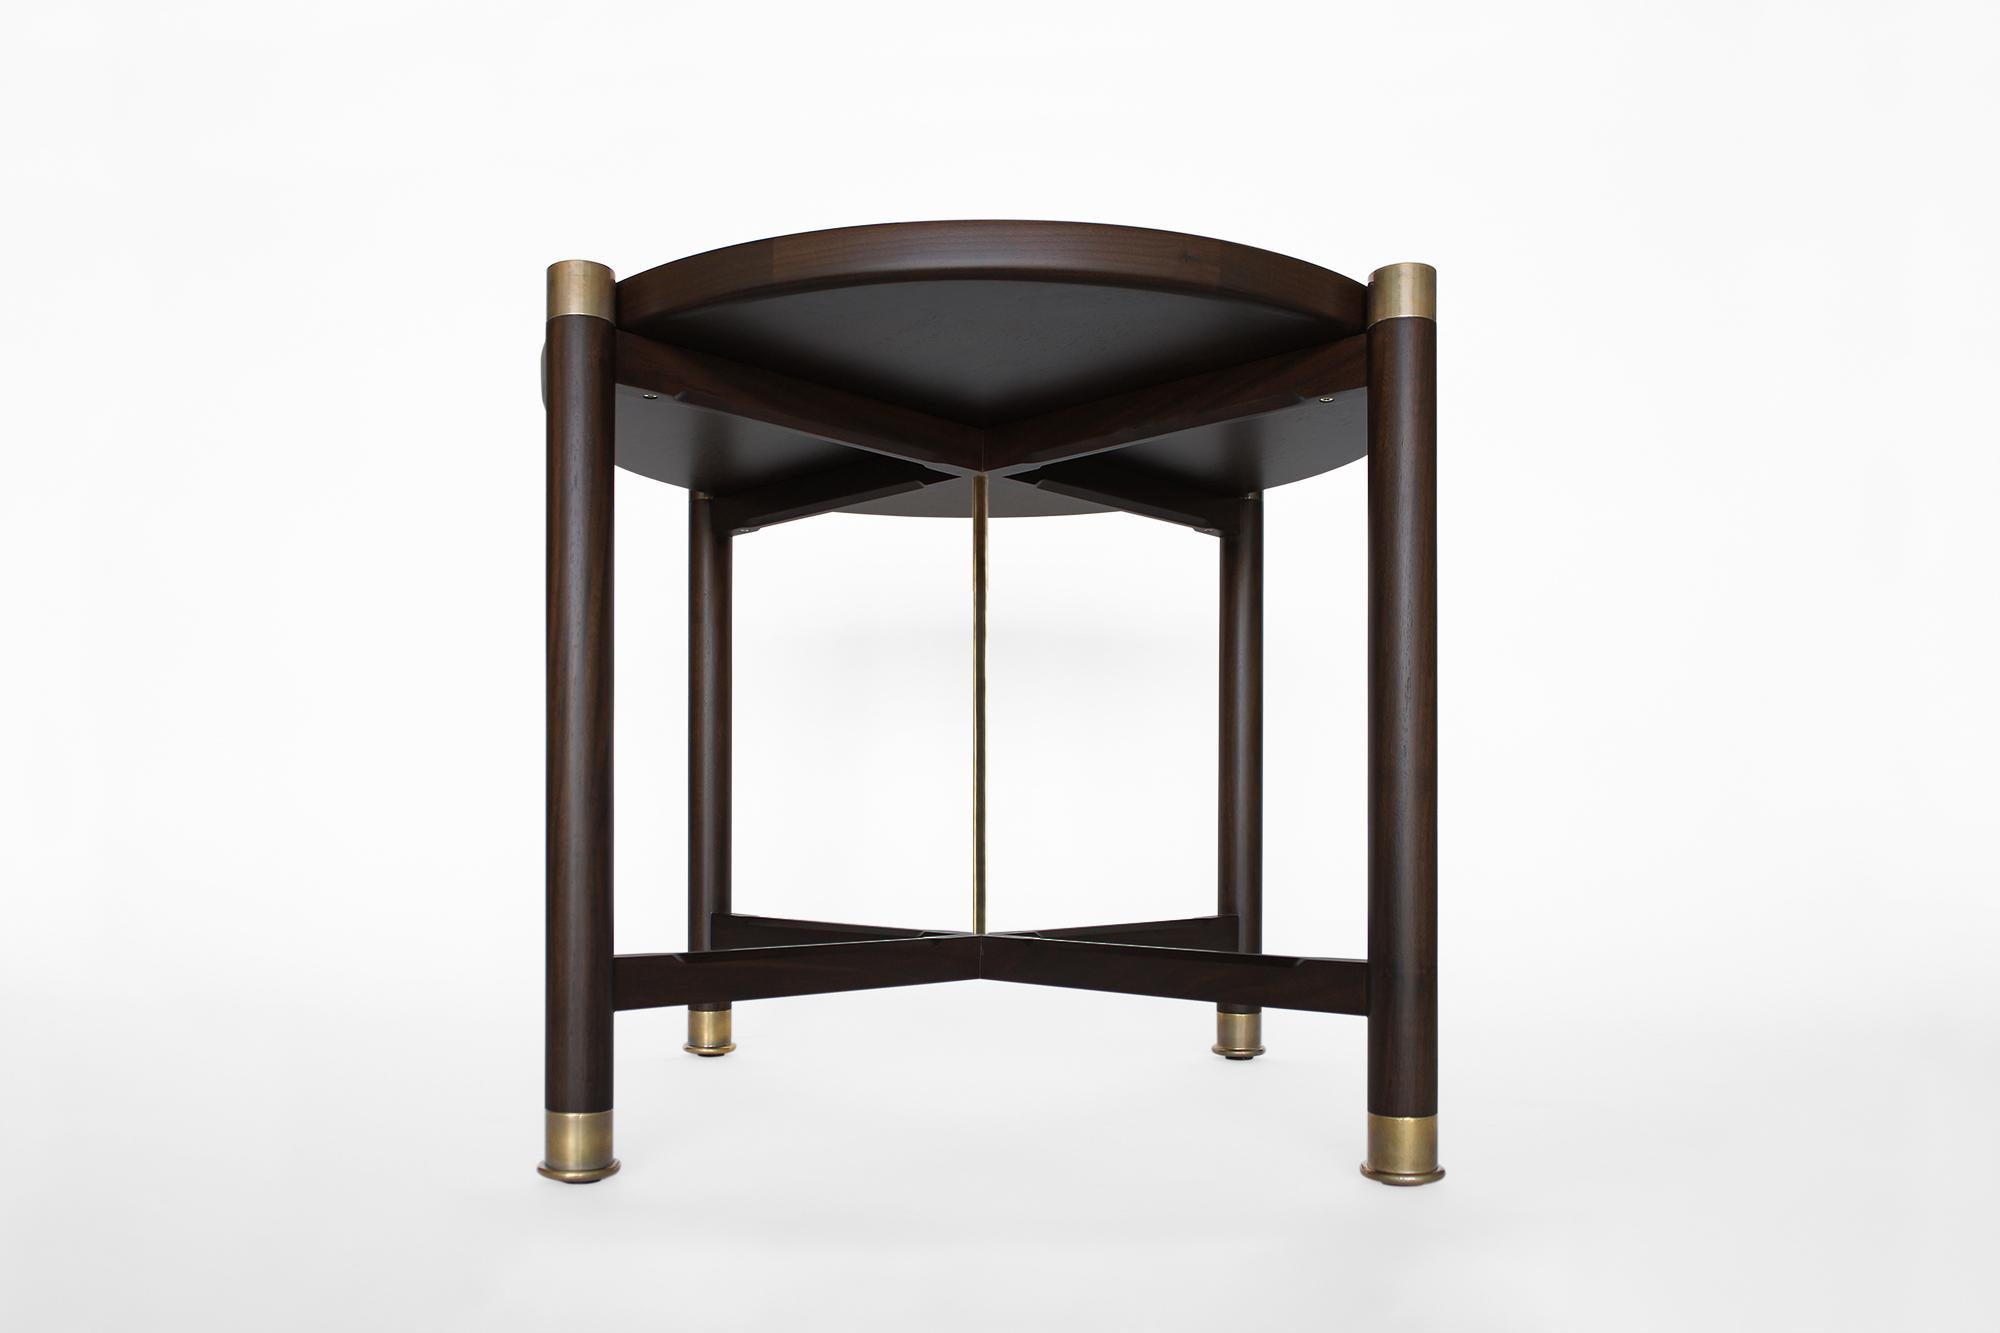 Otto Round Side Table in Ebonized Oak with Antique Brass Fittings and Stem For Sale 1